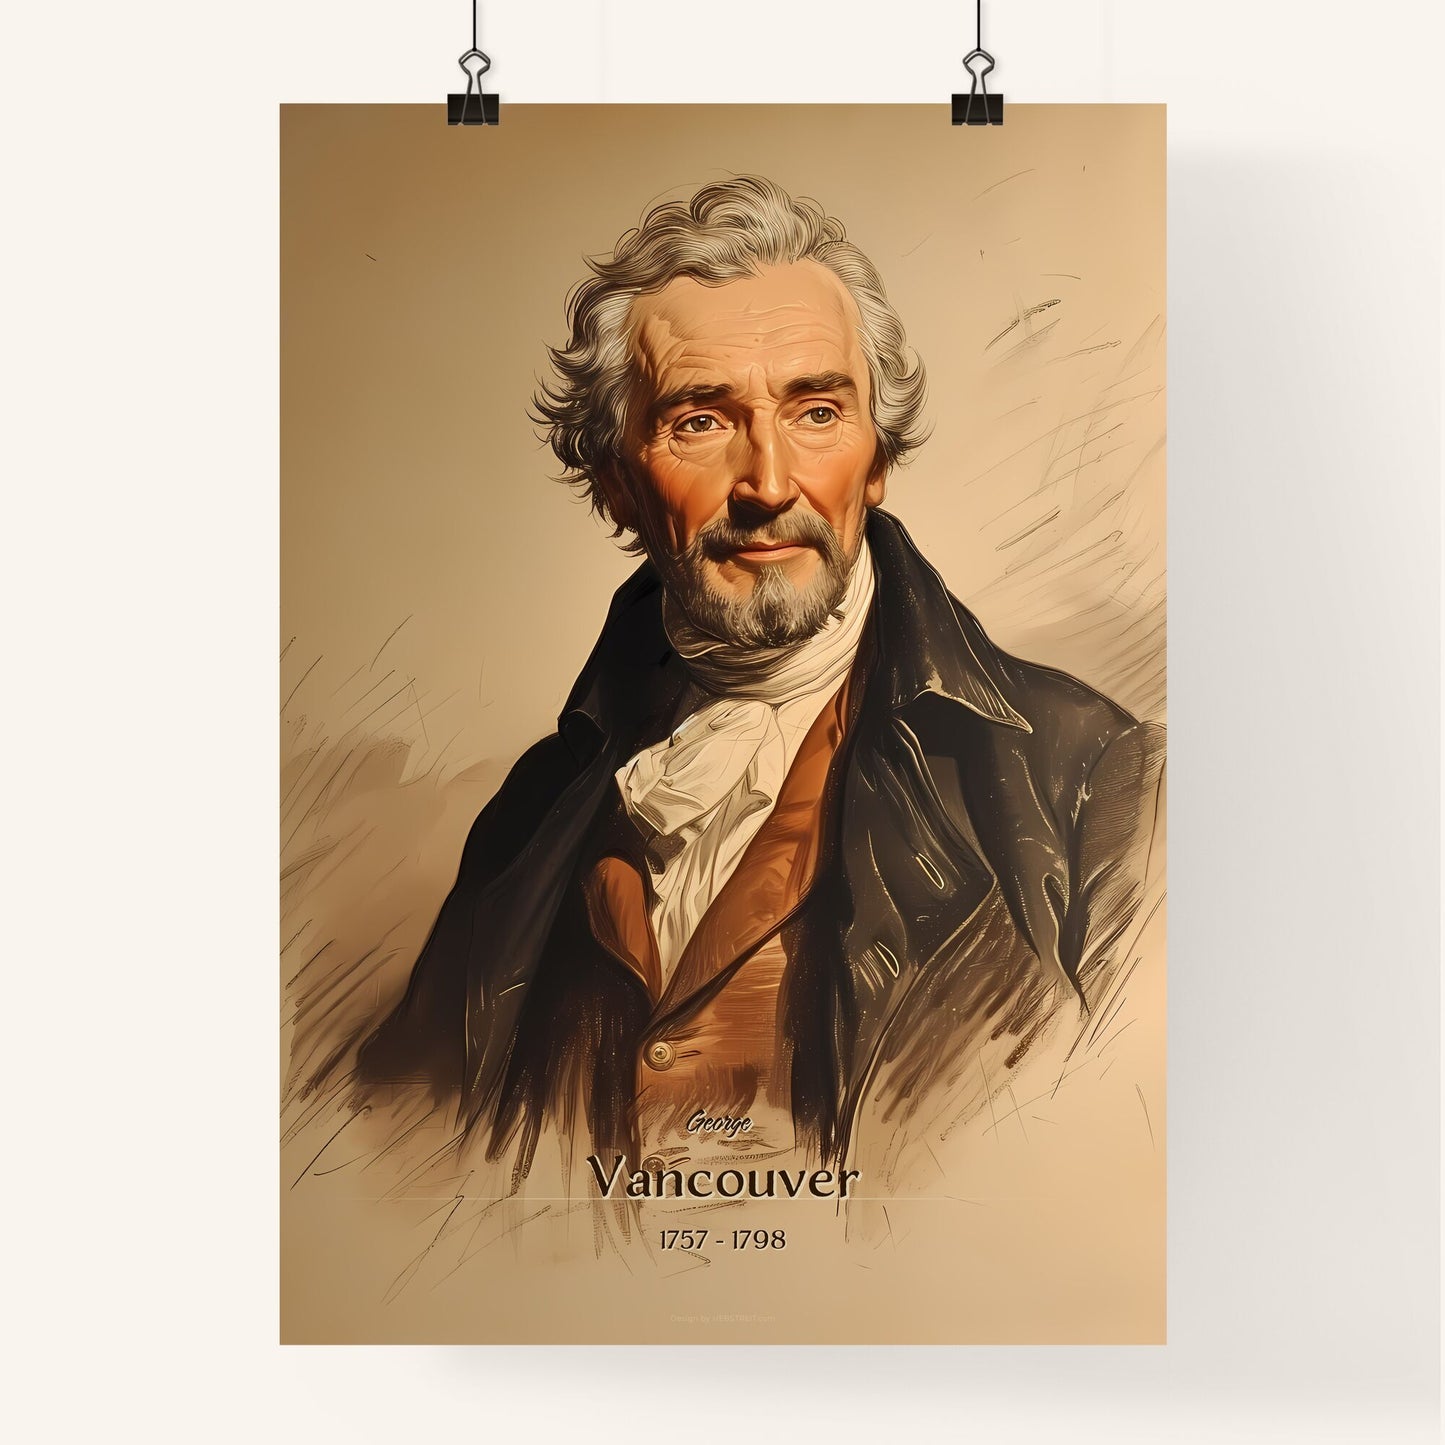 George, Vancouver, 1757 - 1798, A Poster of a man with a beard Default Title